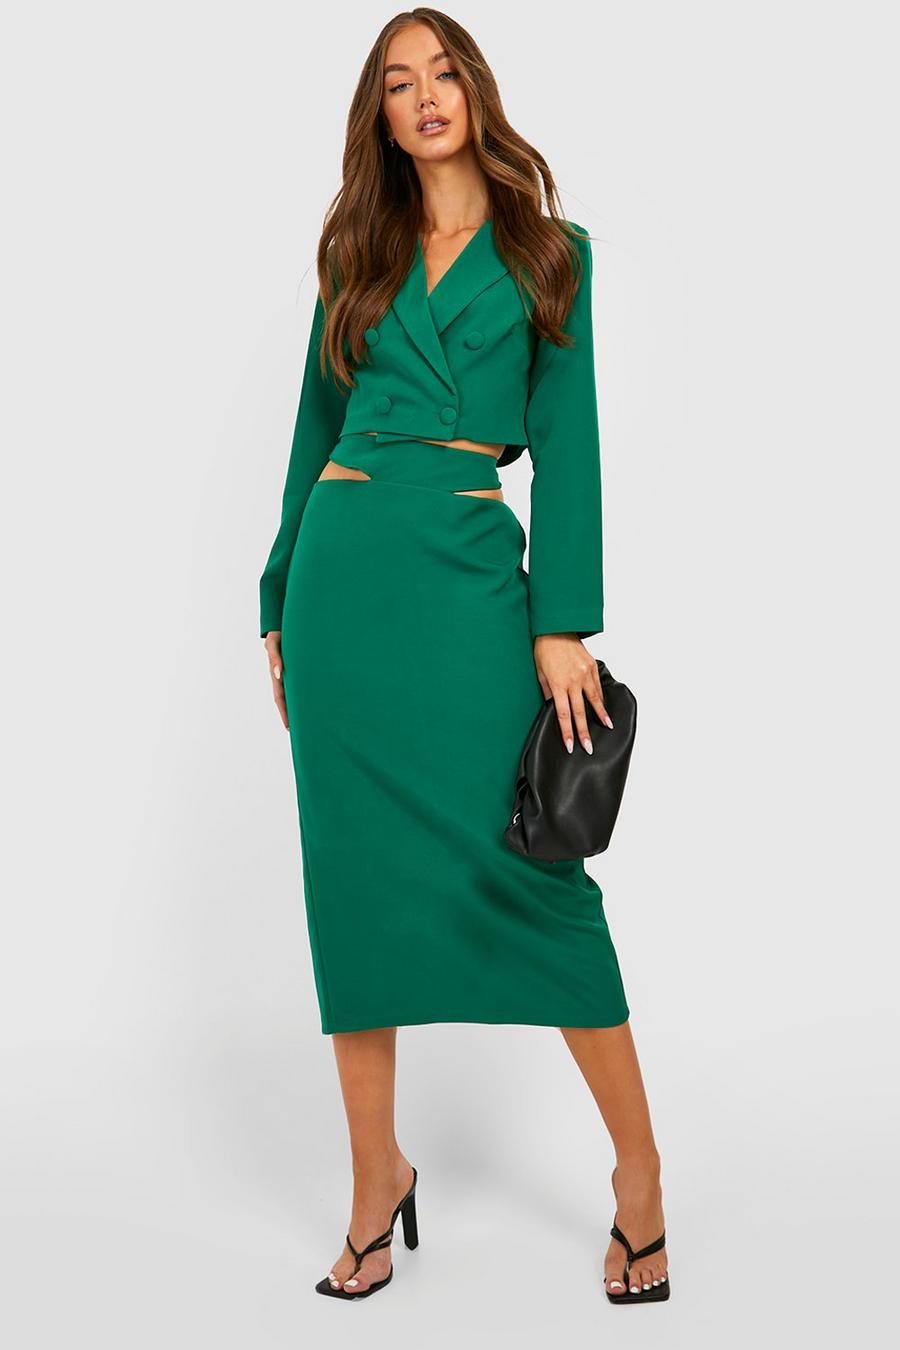 Emerald green Double Breasted Crop Tailored Blazer